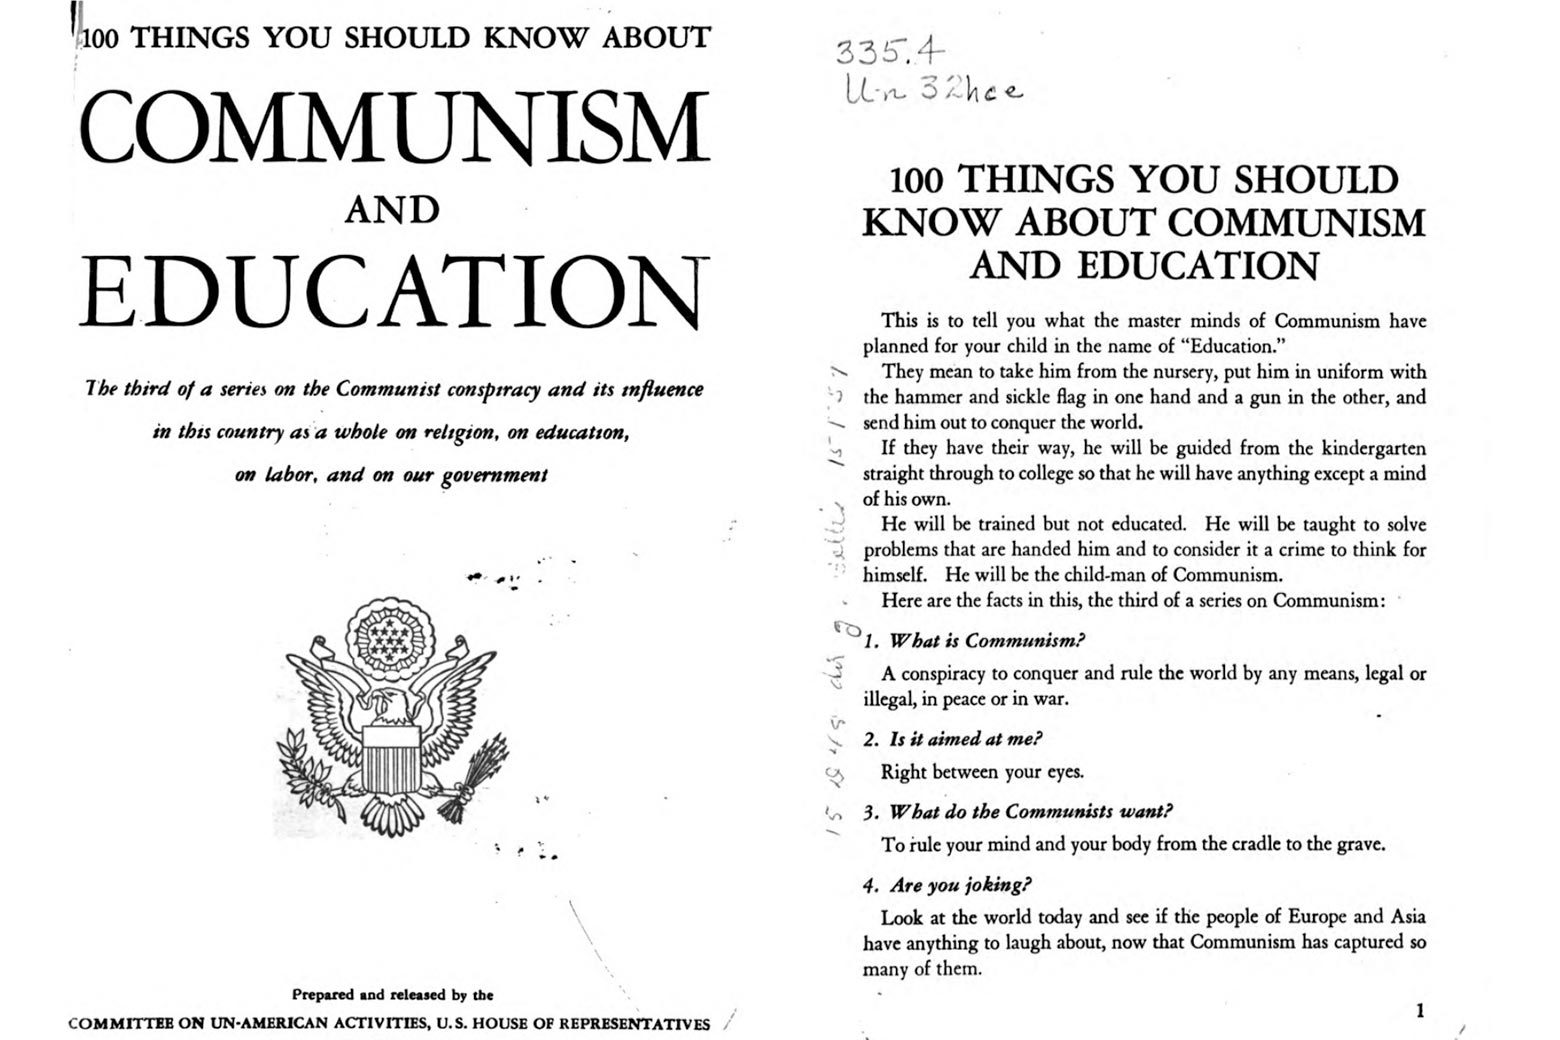 A pamphlet on "100 things you should know about communism and education."